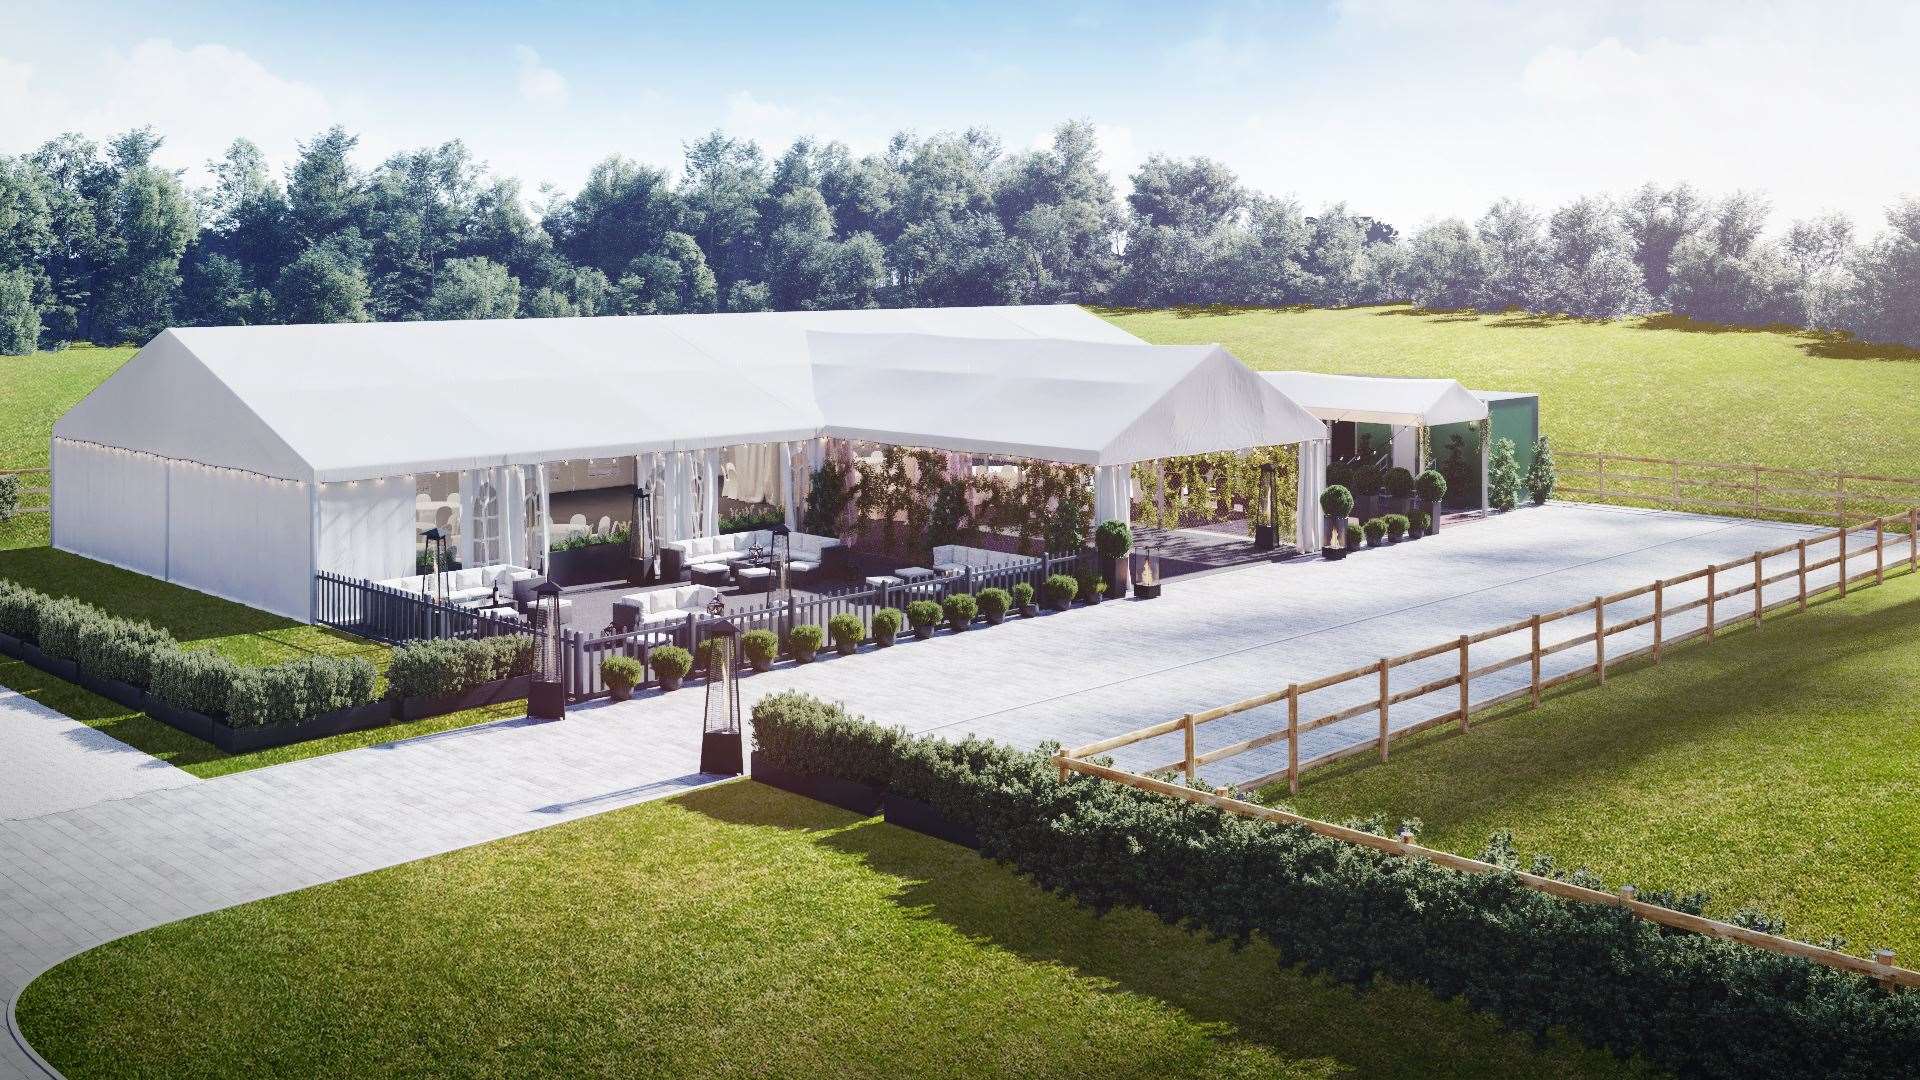 A CGI showing how the wedding marquee will look this summer